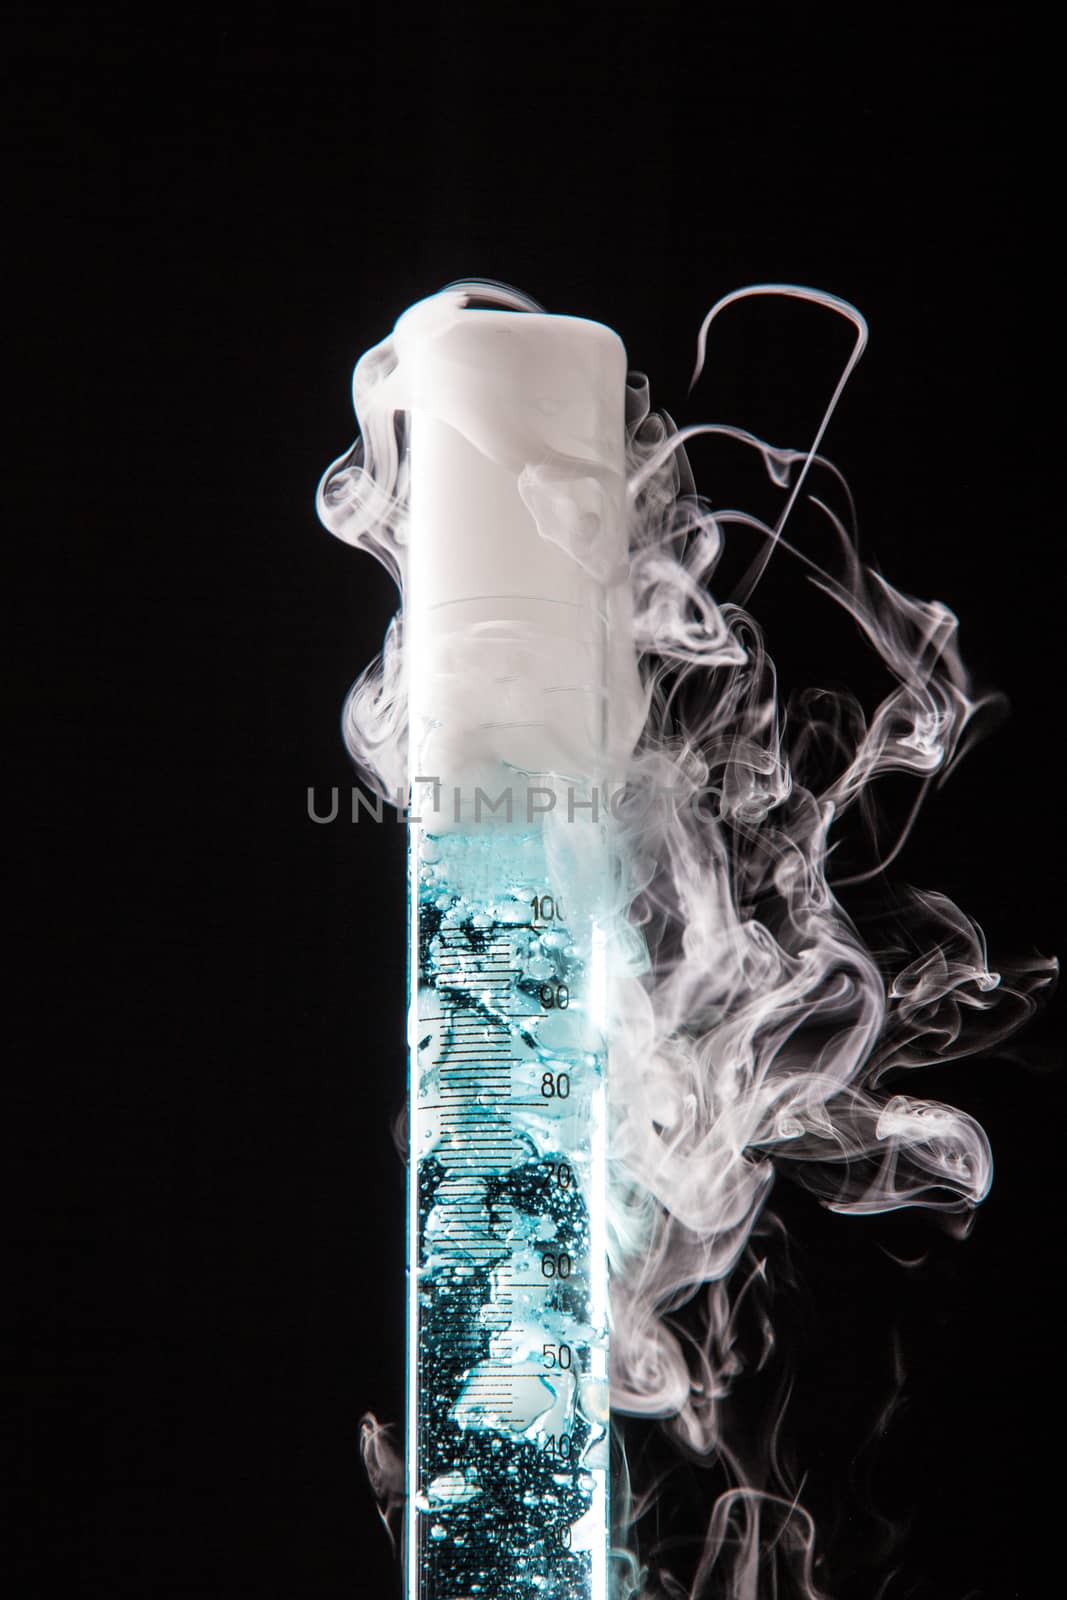 Chemical reaction in labolatory  - studio shoot